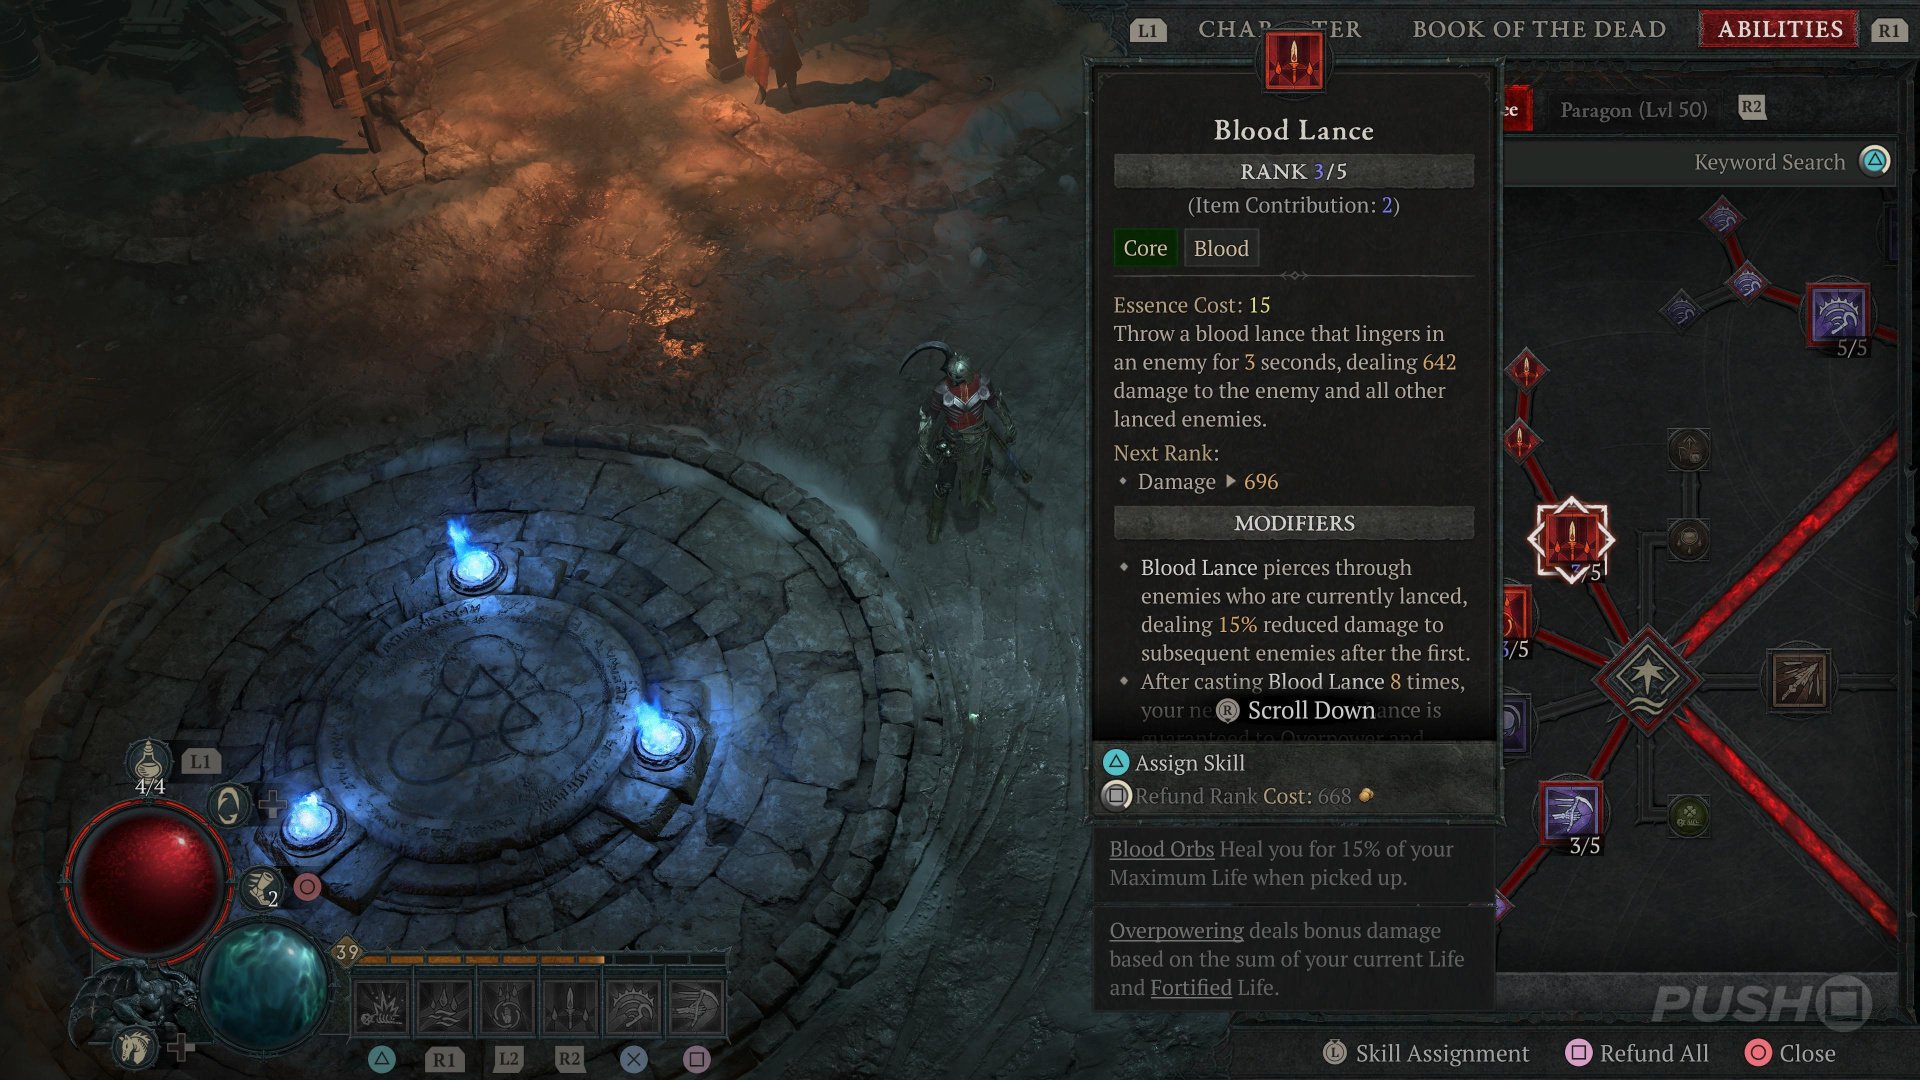 How to download Diablo 4 Beta: PS5, PC, PS4 and Xbox - The SportsRush